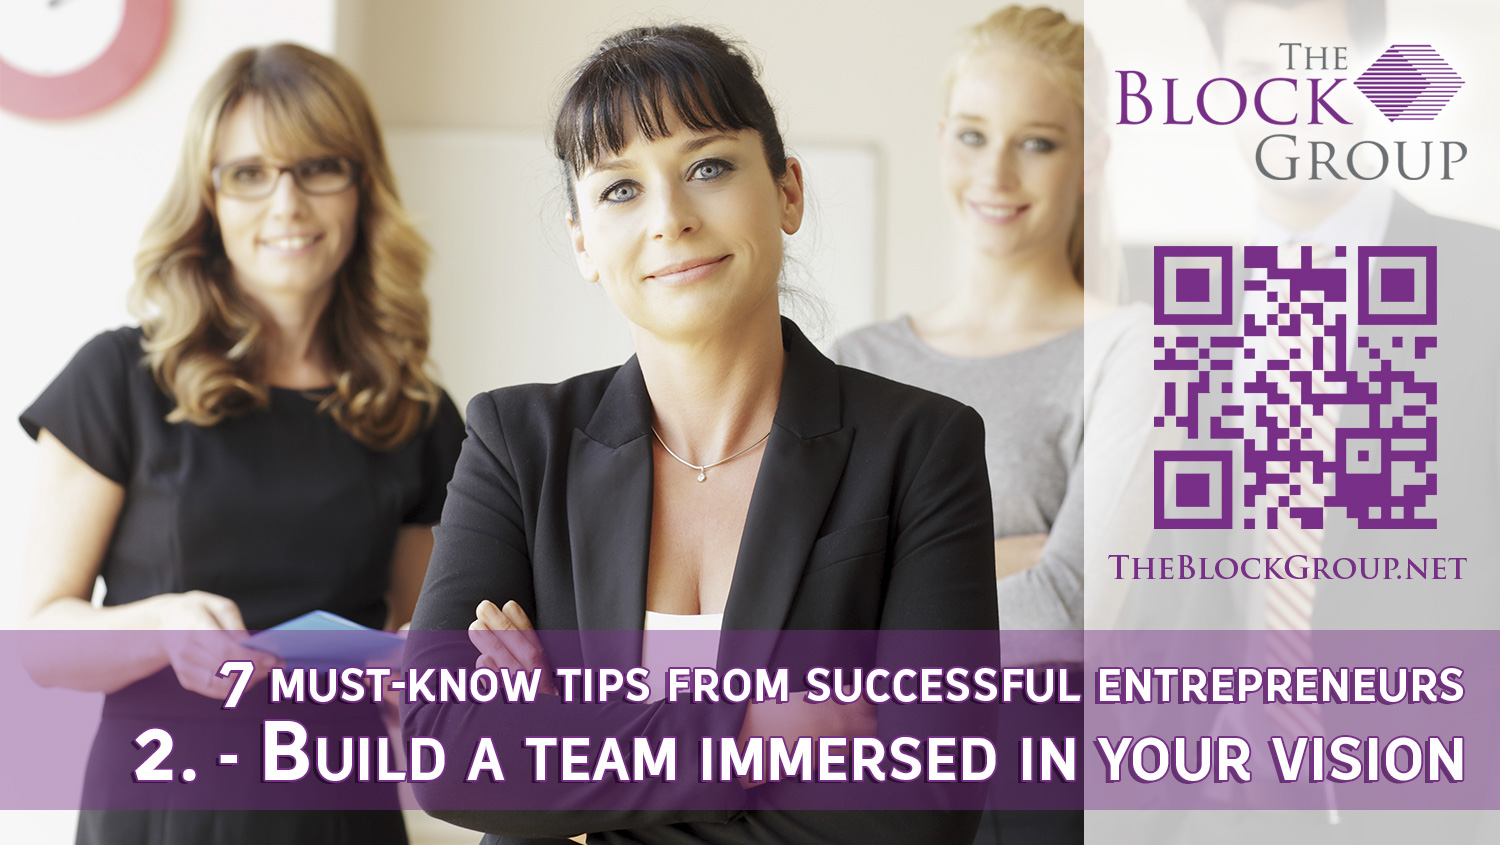 041-2-Build-a-team-immersed-in-your-vision